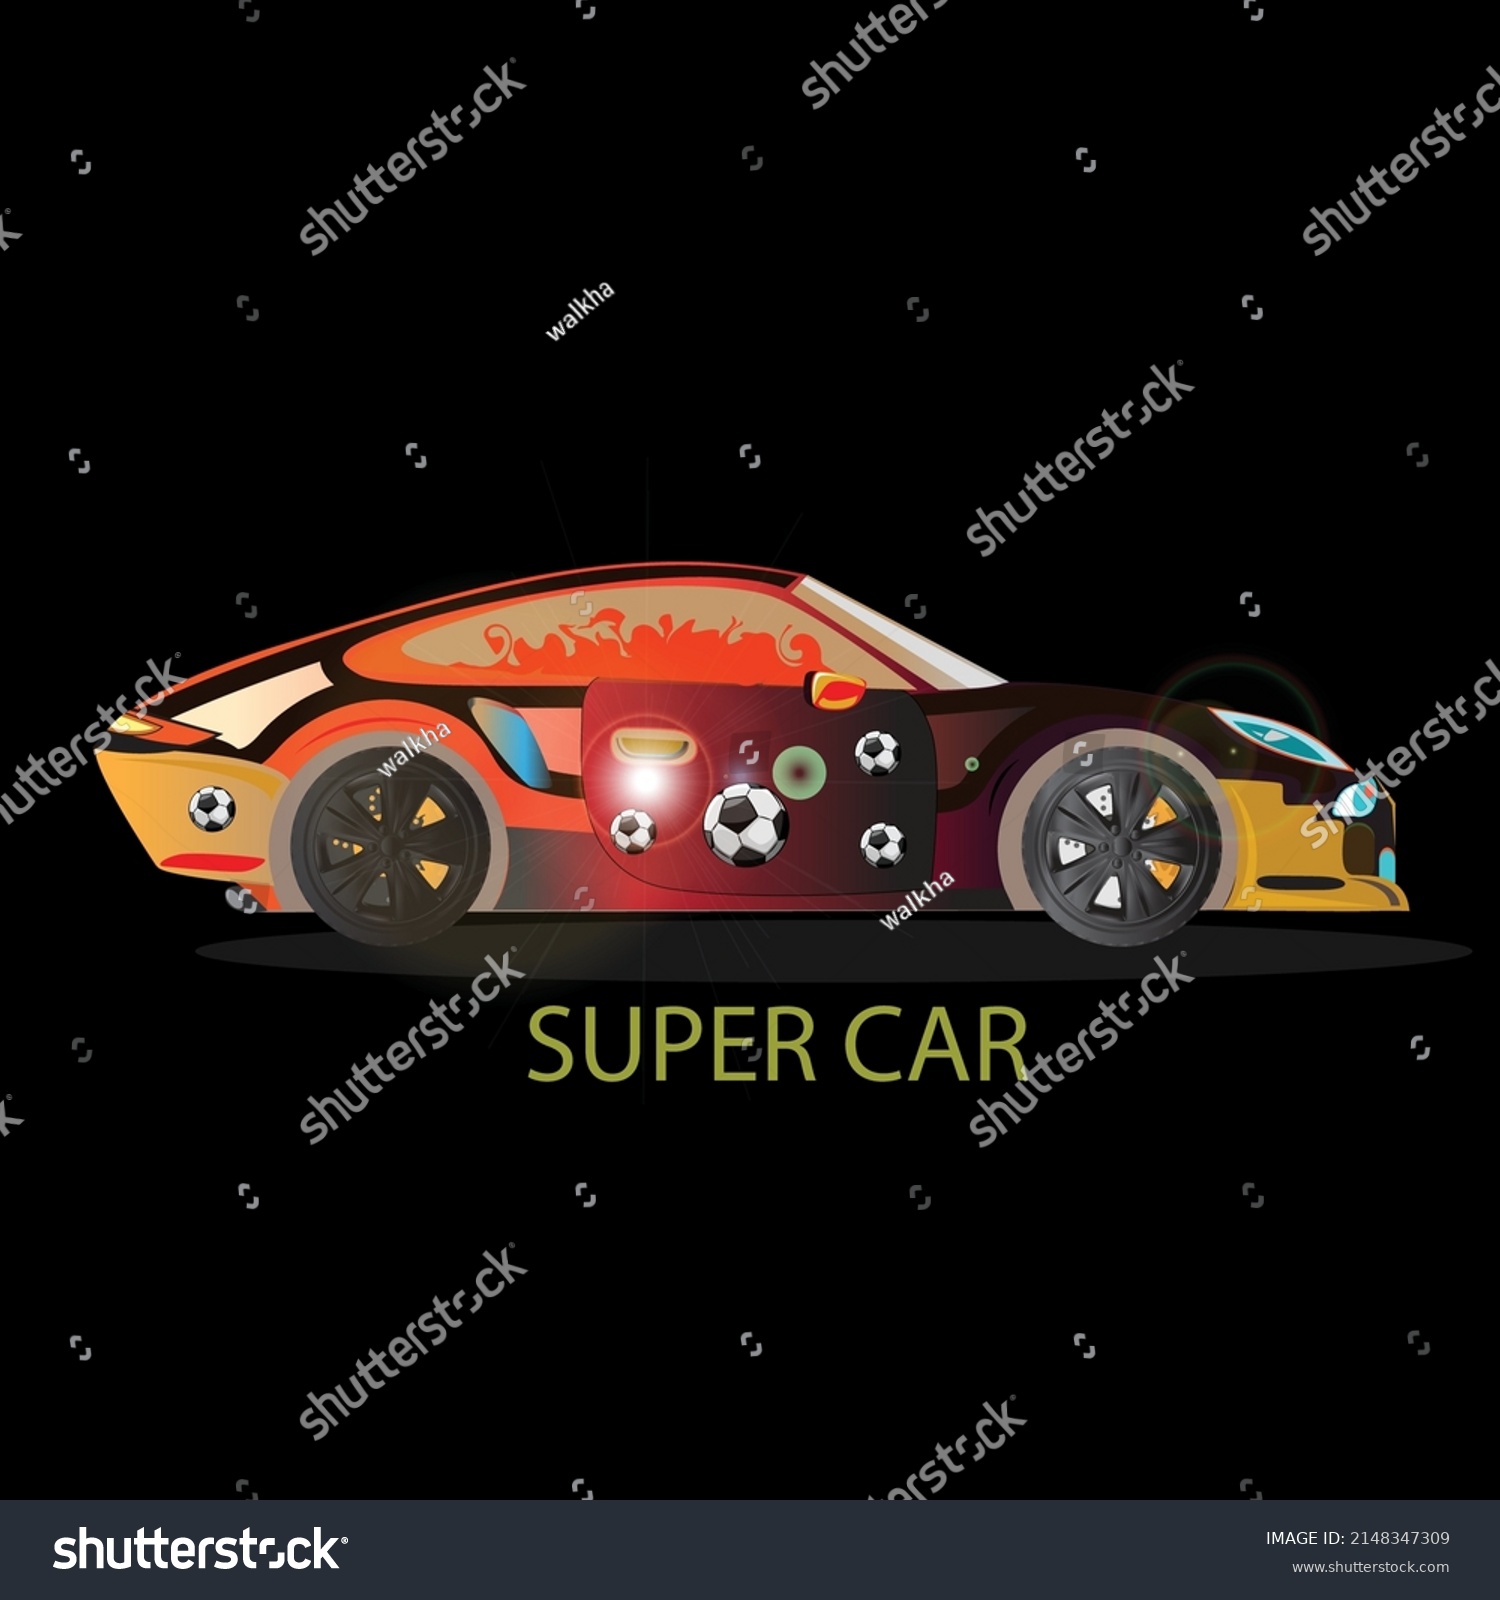 SVG of 3D rendering of a brand-less generic concept car in studio environment. - No trademark issues as the car is my own design. The car does not exist in real life. svg